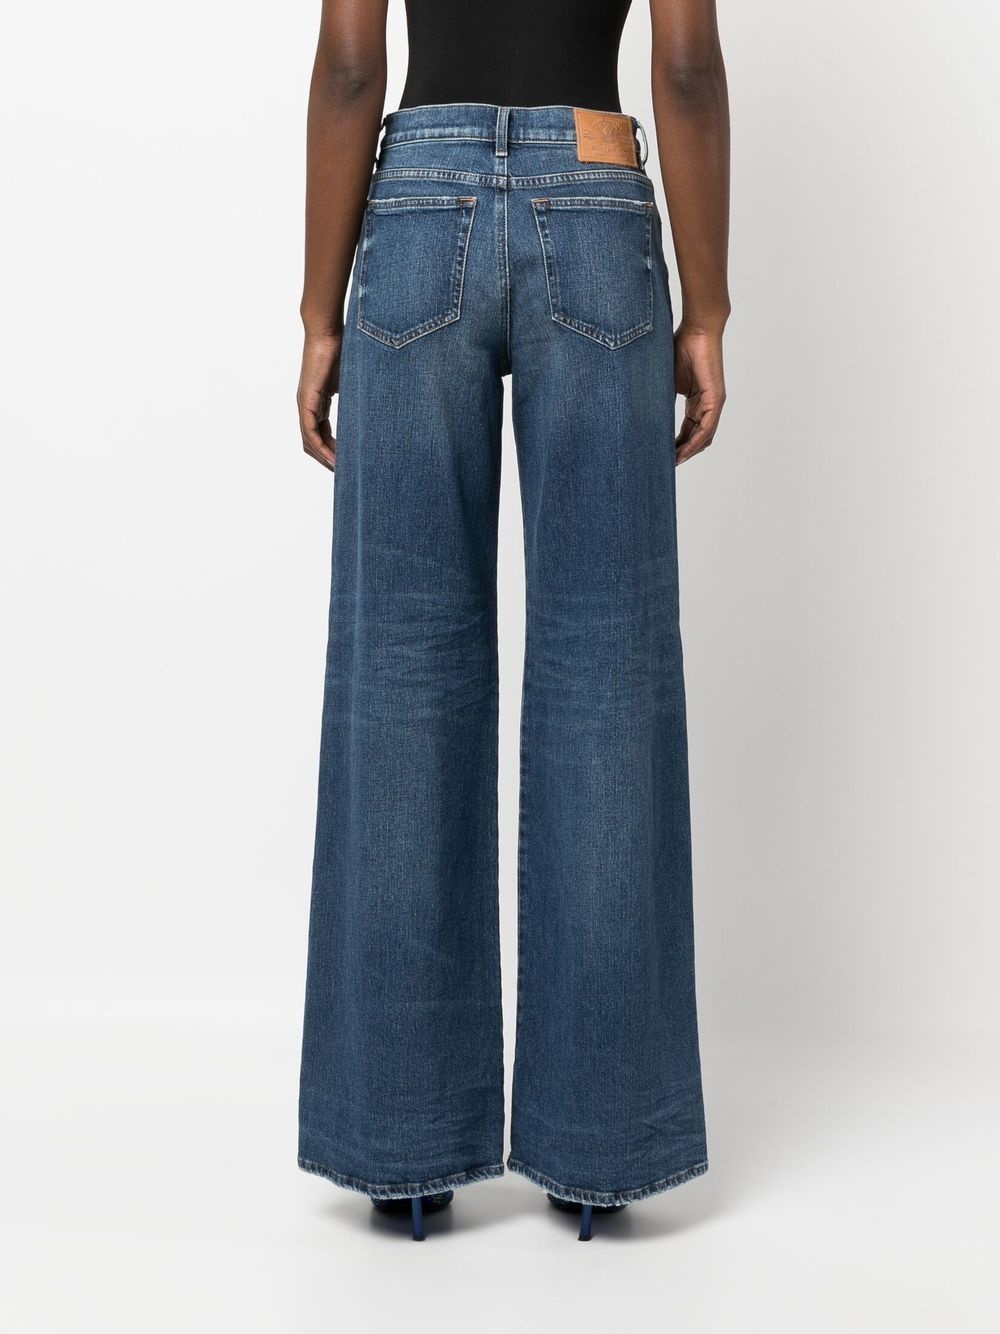 1978 flared bootcut jeans - 4